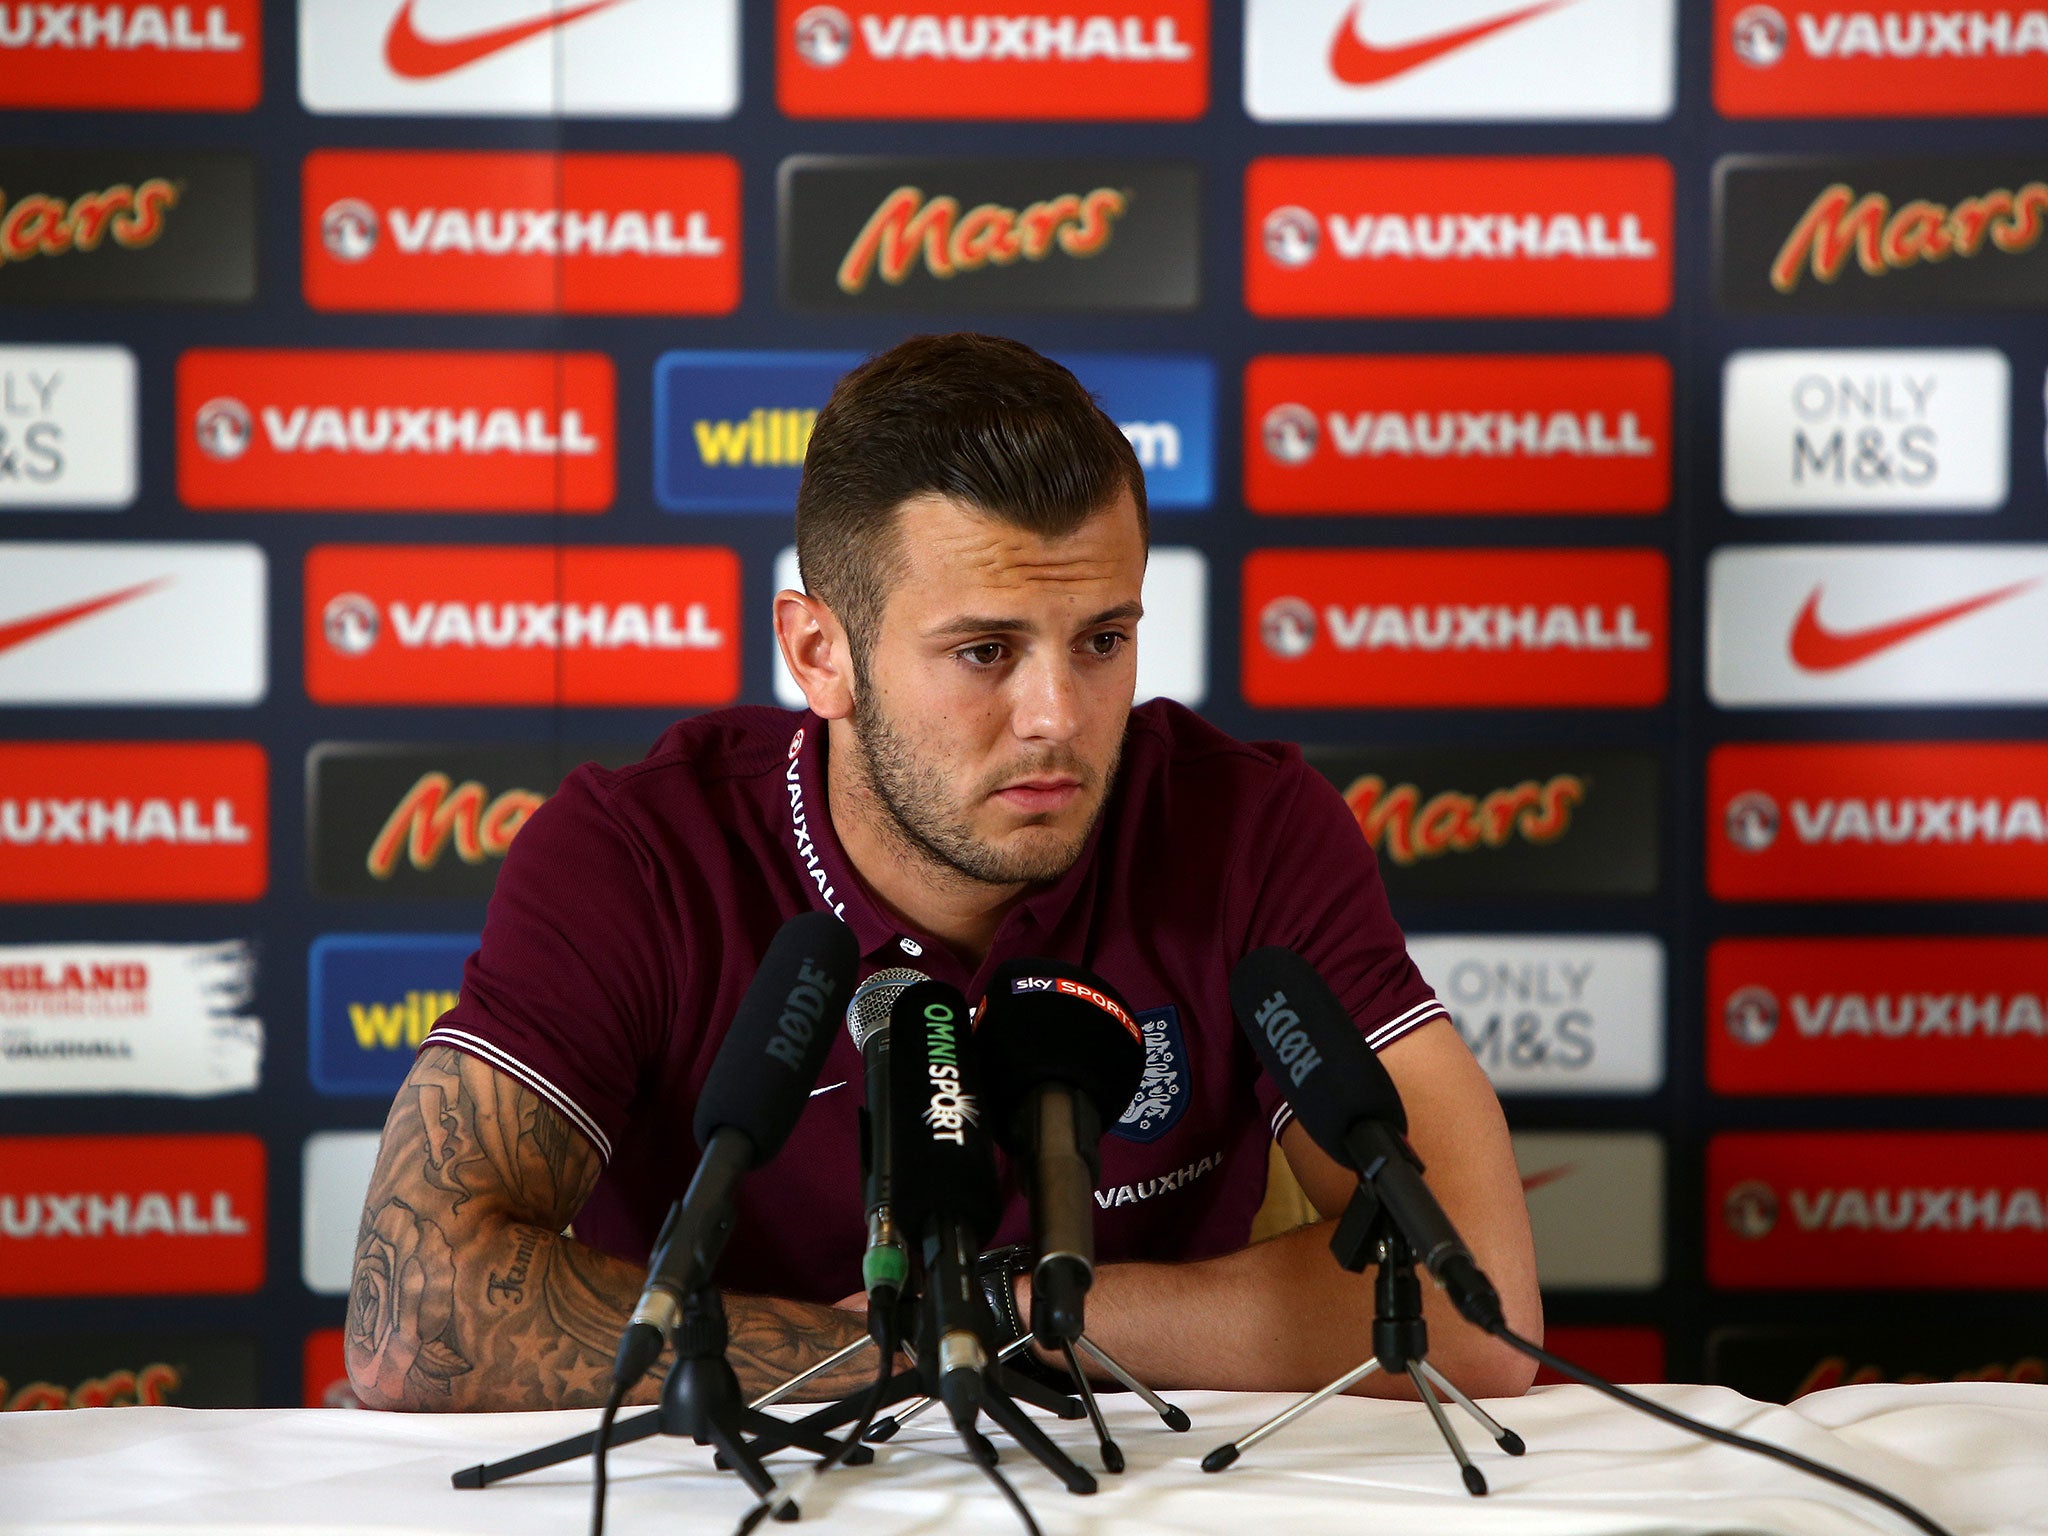 Jack Wilshere insists he will not leave Arsenal